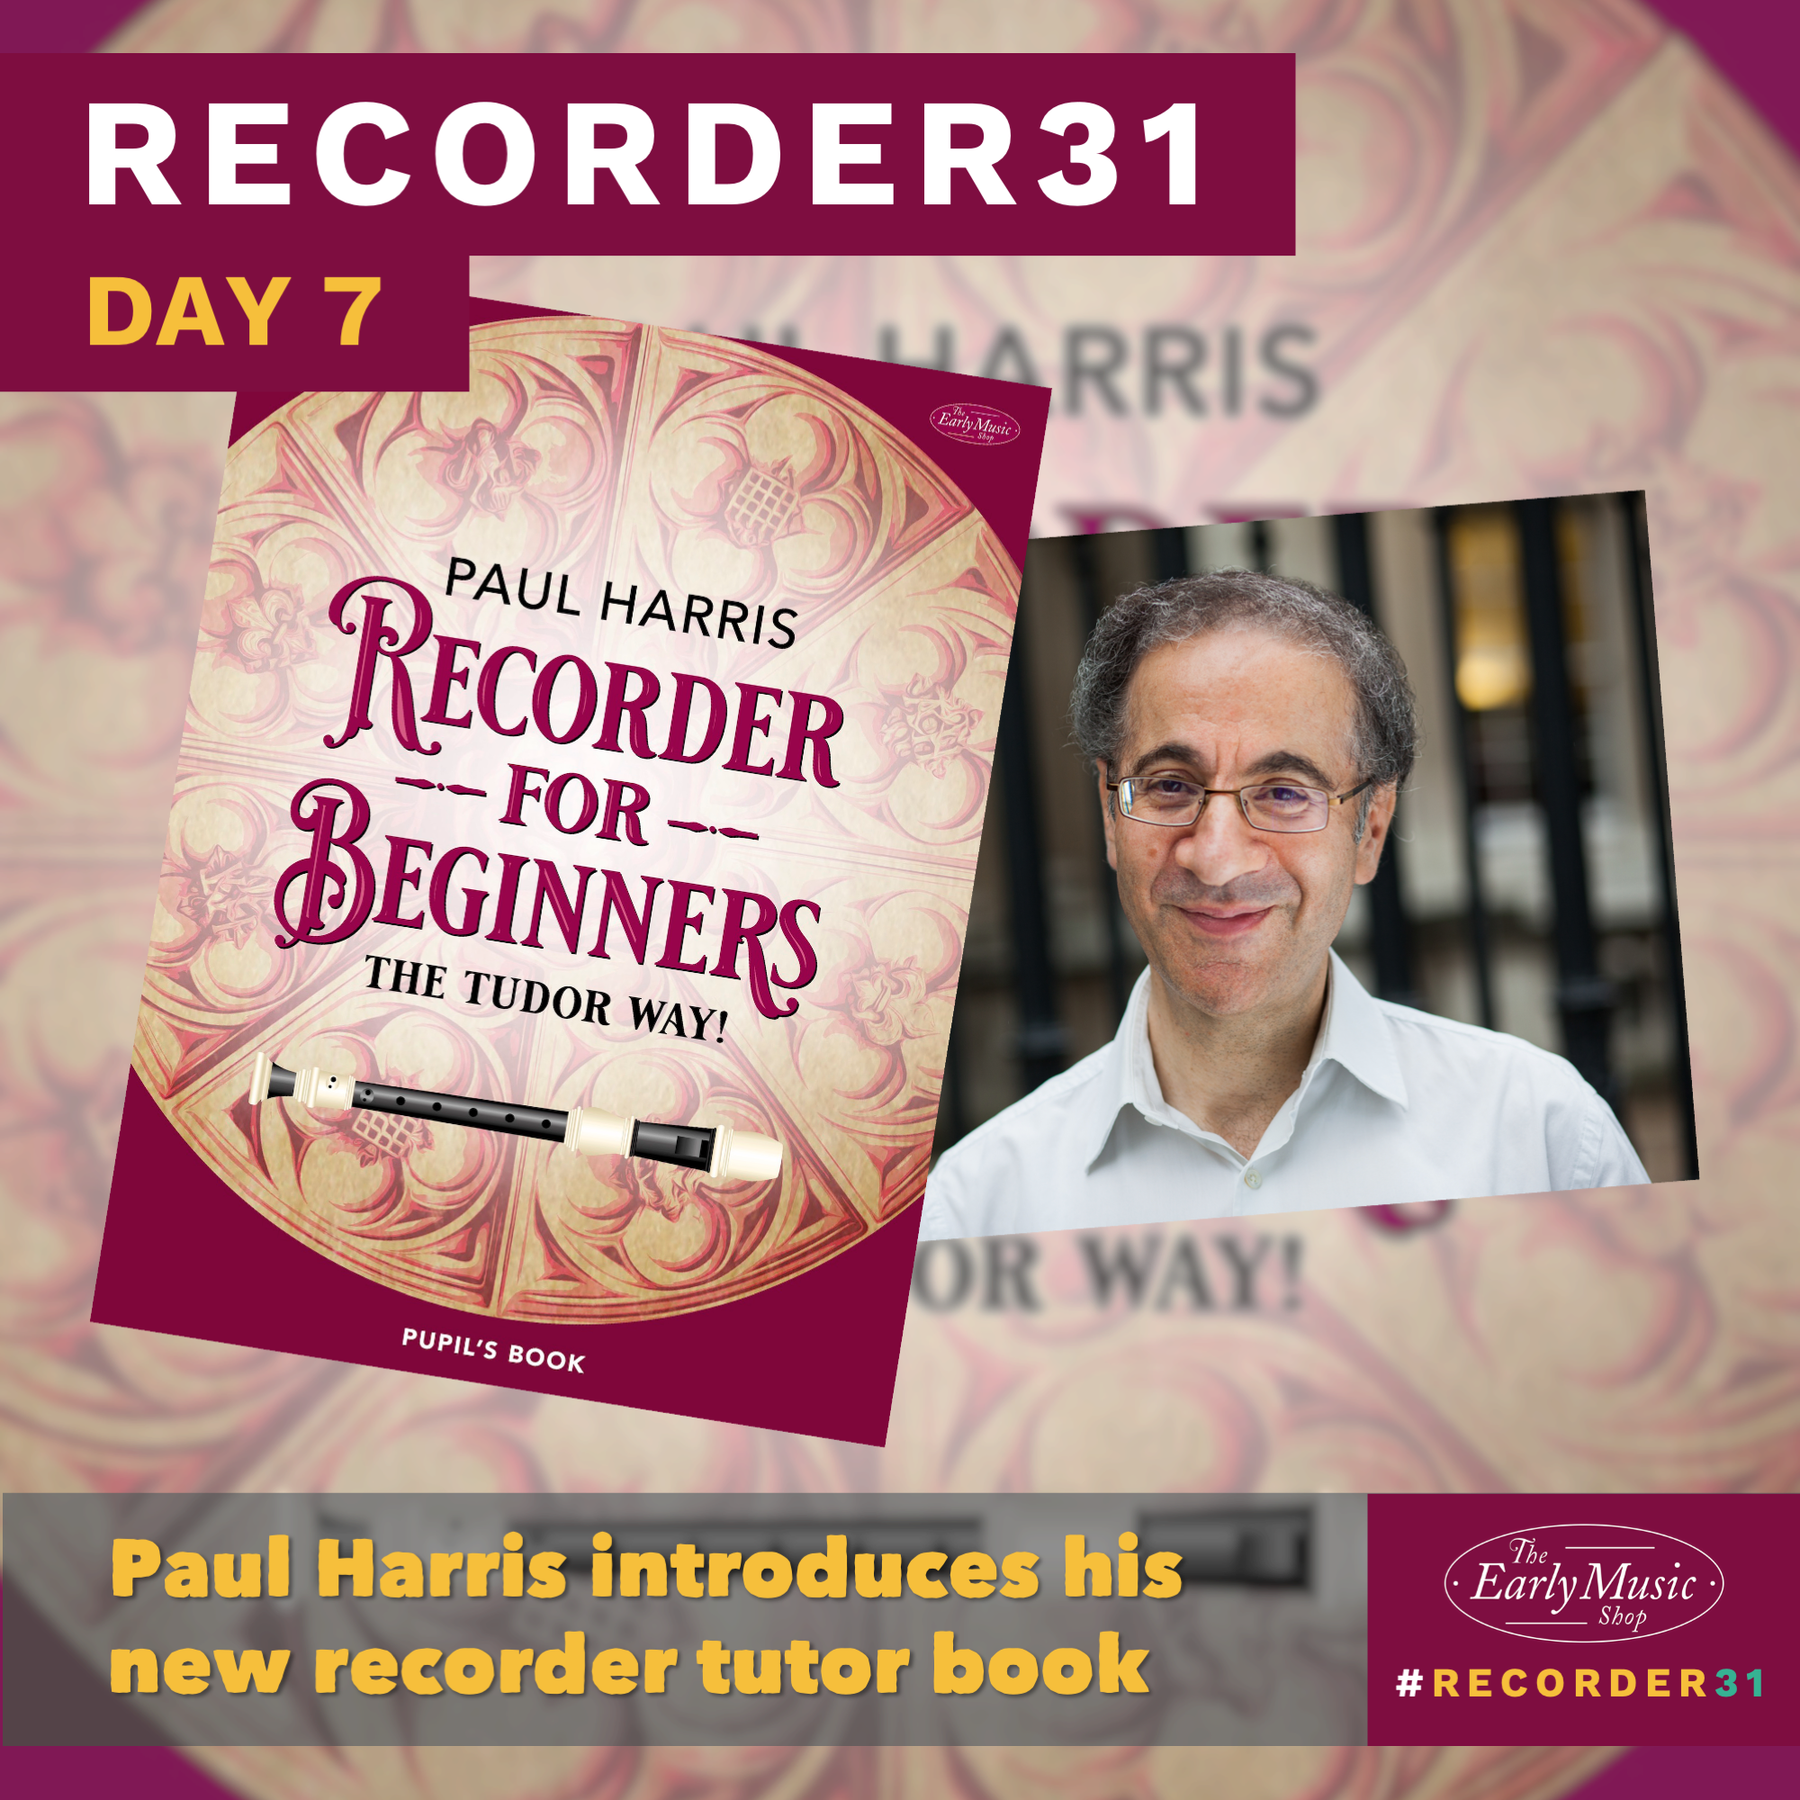 Recorder31 Day 7 | Paul Harris introduces 'Recorder for Beginners: The Tudor Way'